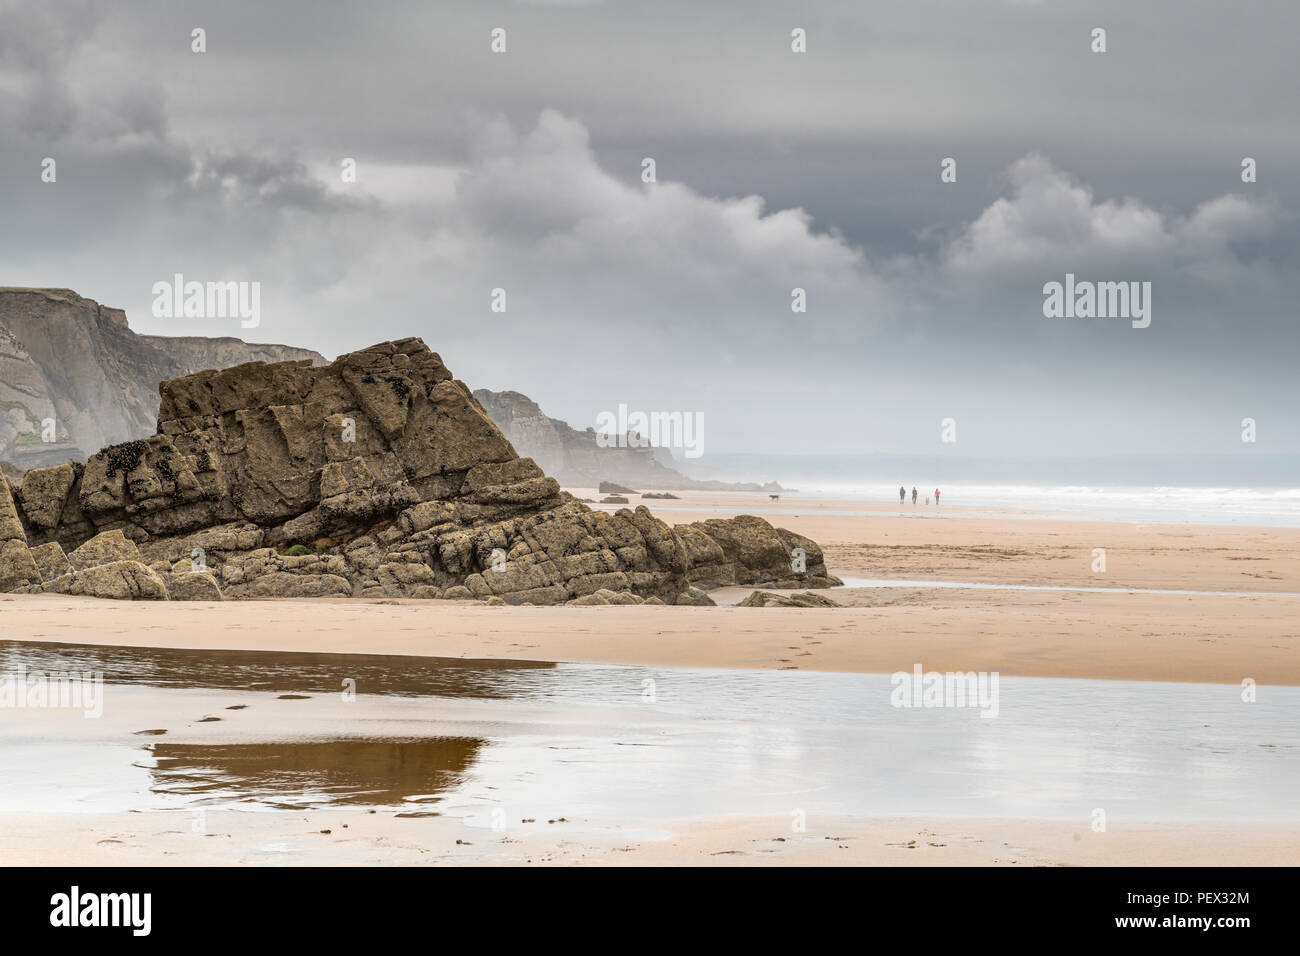 Increasing sea mist and gathering storm clouds form over the expansive open beach at Sandymouth in North Cornwall. Stock Photo